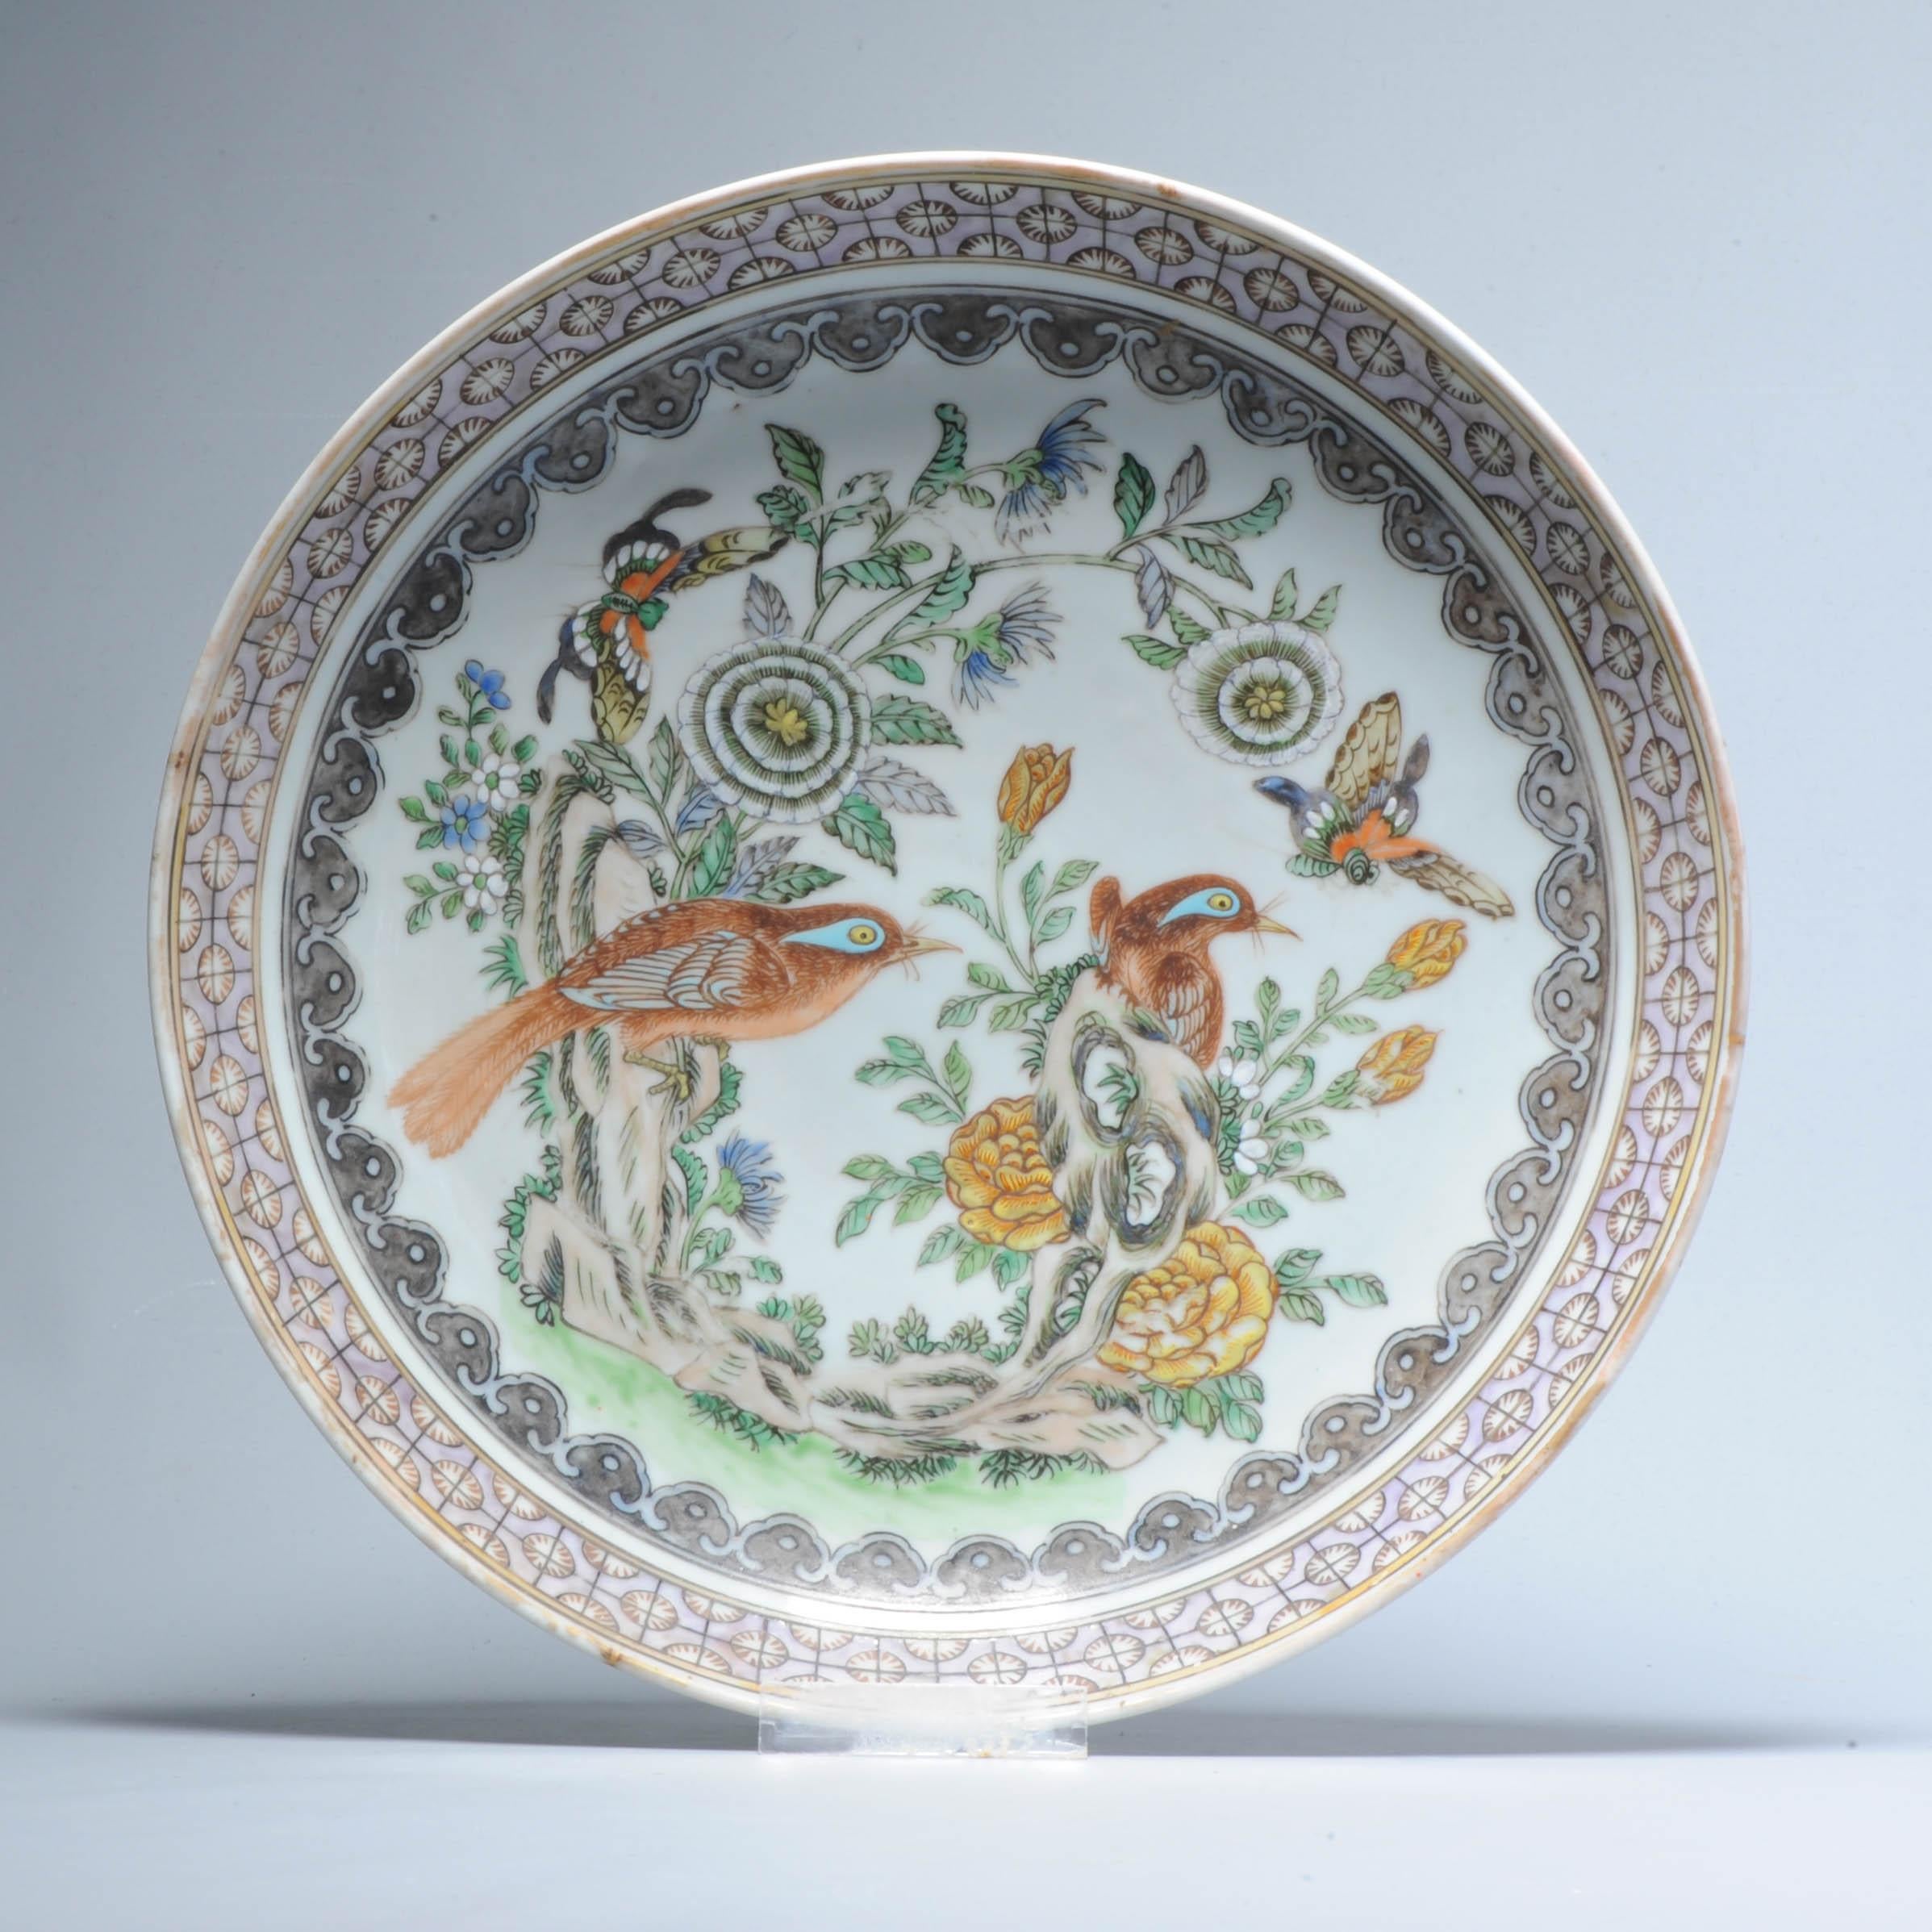 Superb antique Chinese porcelain Dish/Plate from the late qing period.

Painted in cantonese style with a fantastic landscape scene with birds, butterflies, flowers and geomtric design in the border.

The painting is of very high